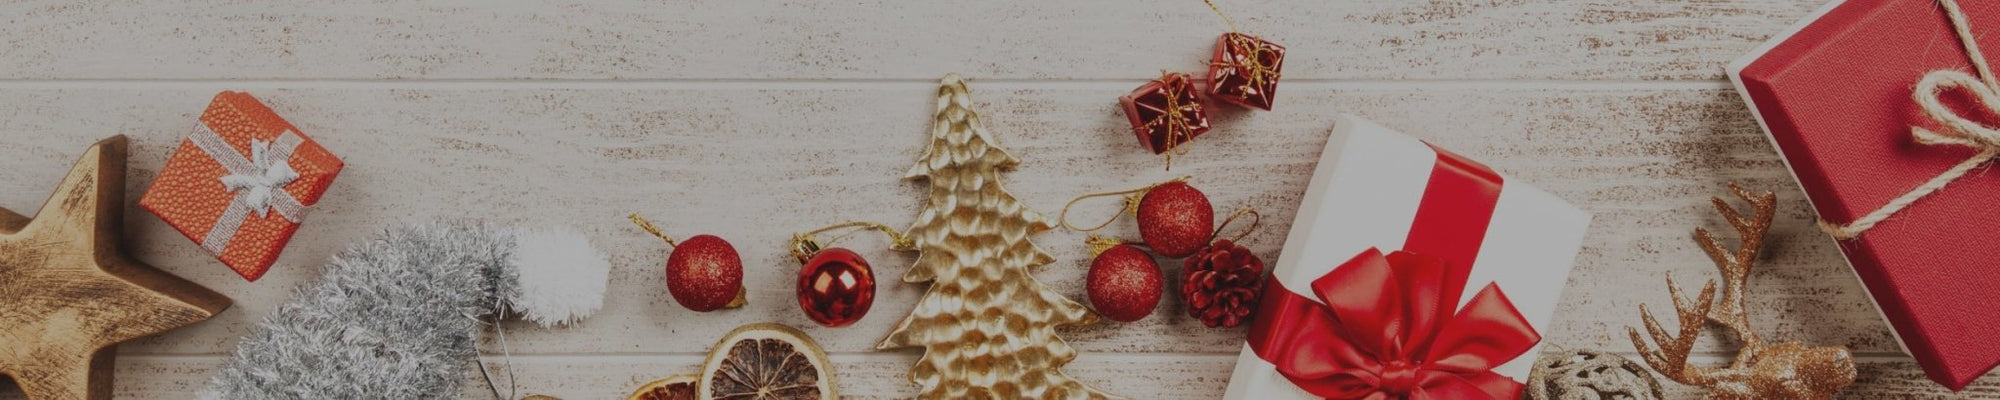 5 Wholesale Christmas Kitchen Decor Pieces to Help Your Customers Serve Holiday Magic - Wholesale Accessory Market